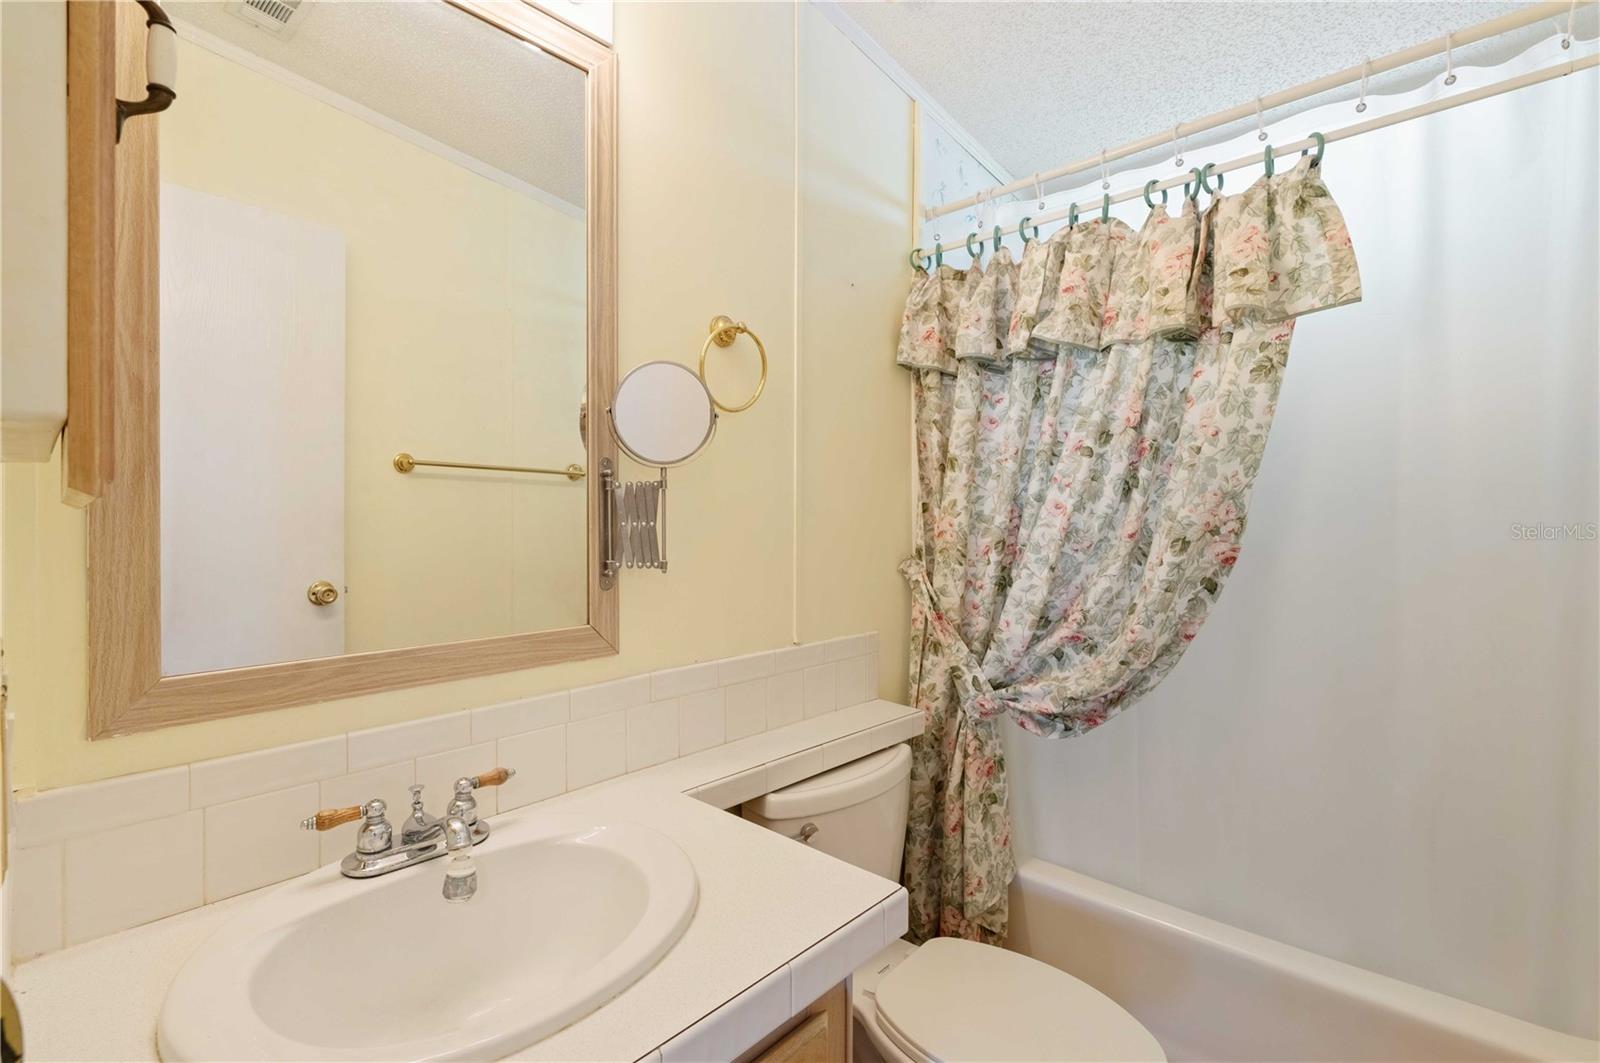 Guest bath has tub/shower combo, high toilet, and laminate flooring.